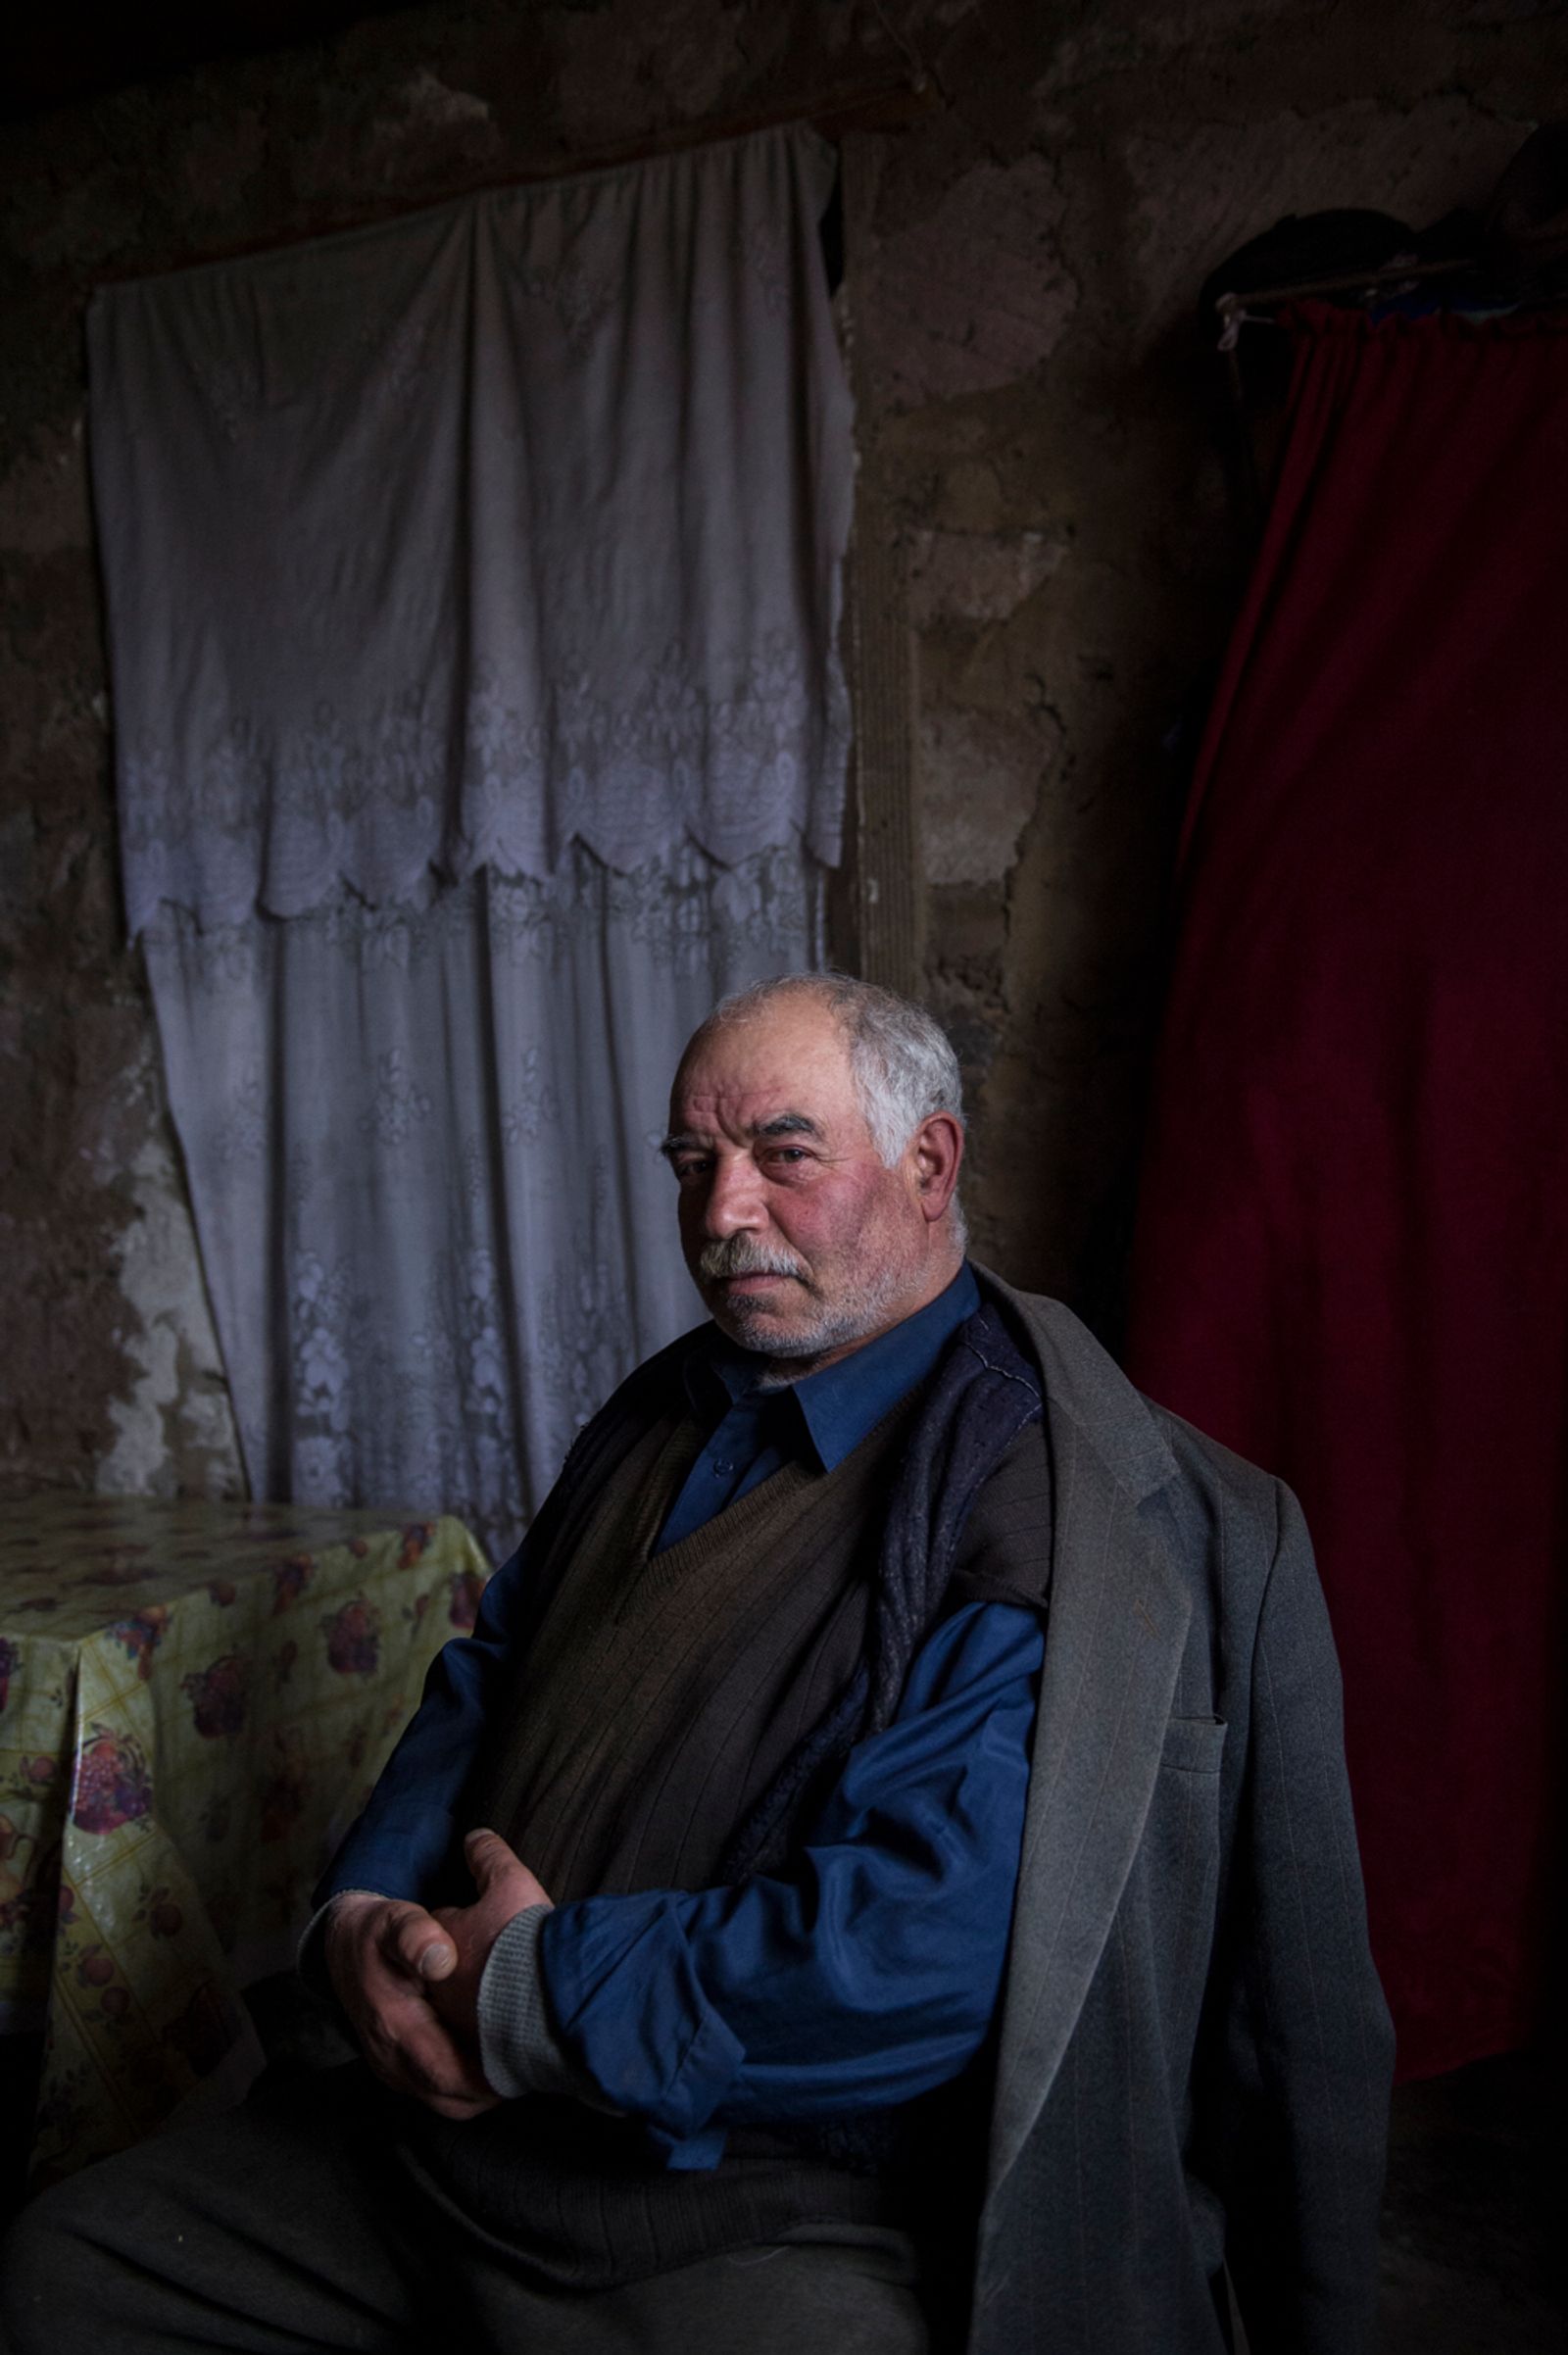 © Michela&amp;Emanuela Colombo - Image from the PEACOCK BLUES The Armenian Yazidis. photography project